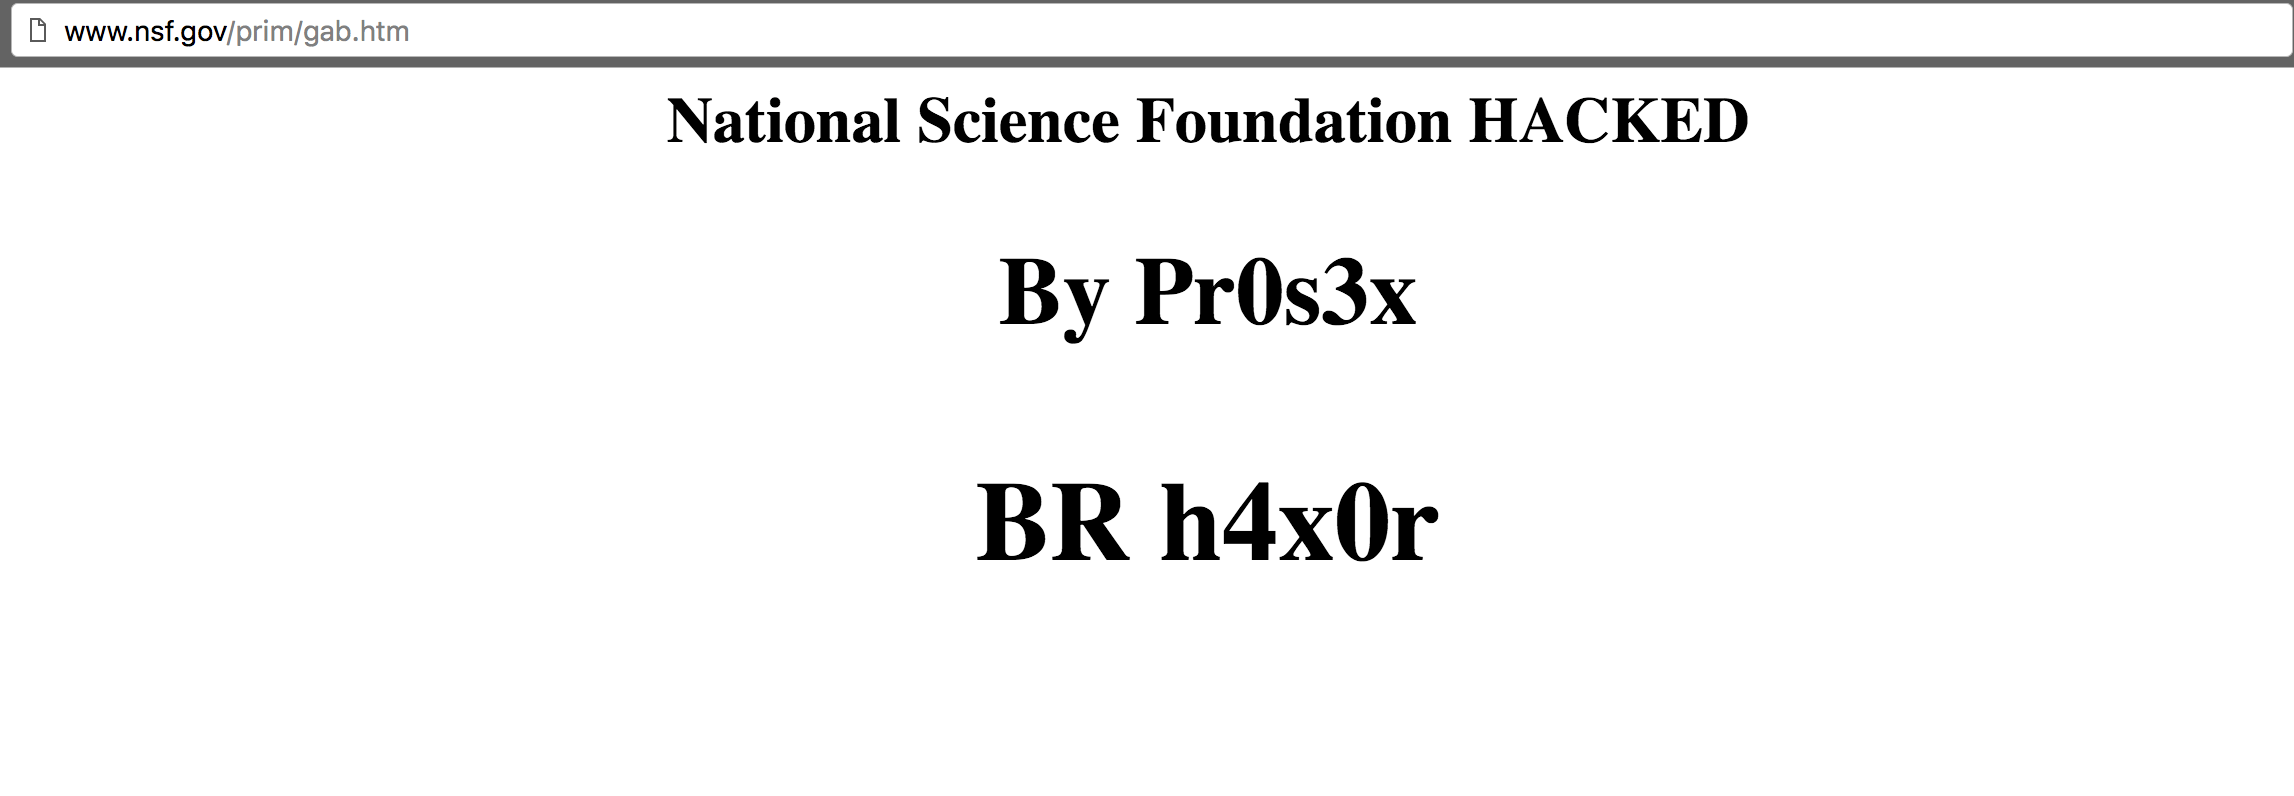 Screenshot of the deface page uploaded Pr0s3x on National Science Foundation Website (NSF.GOV)